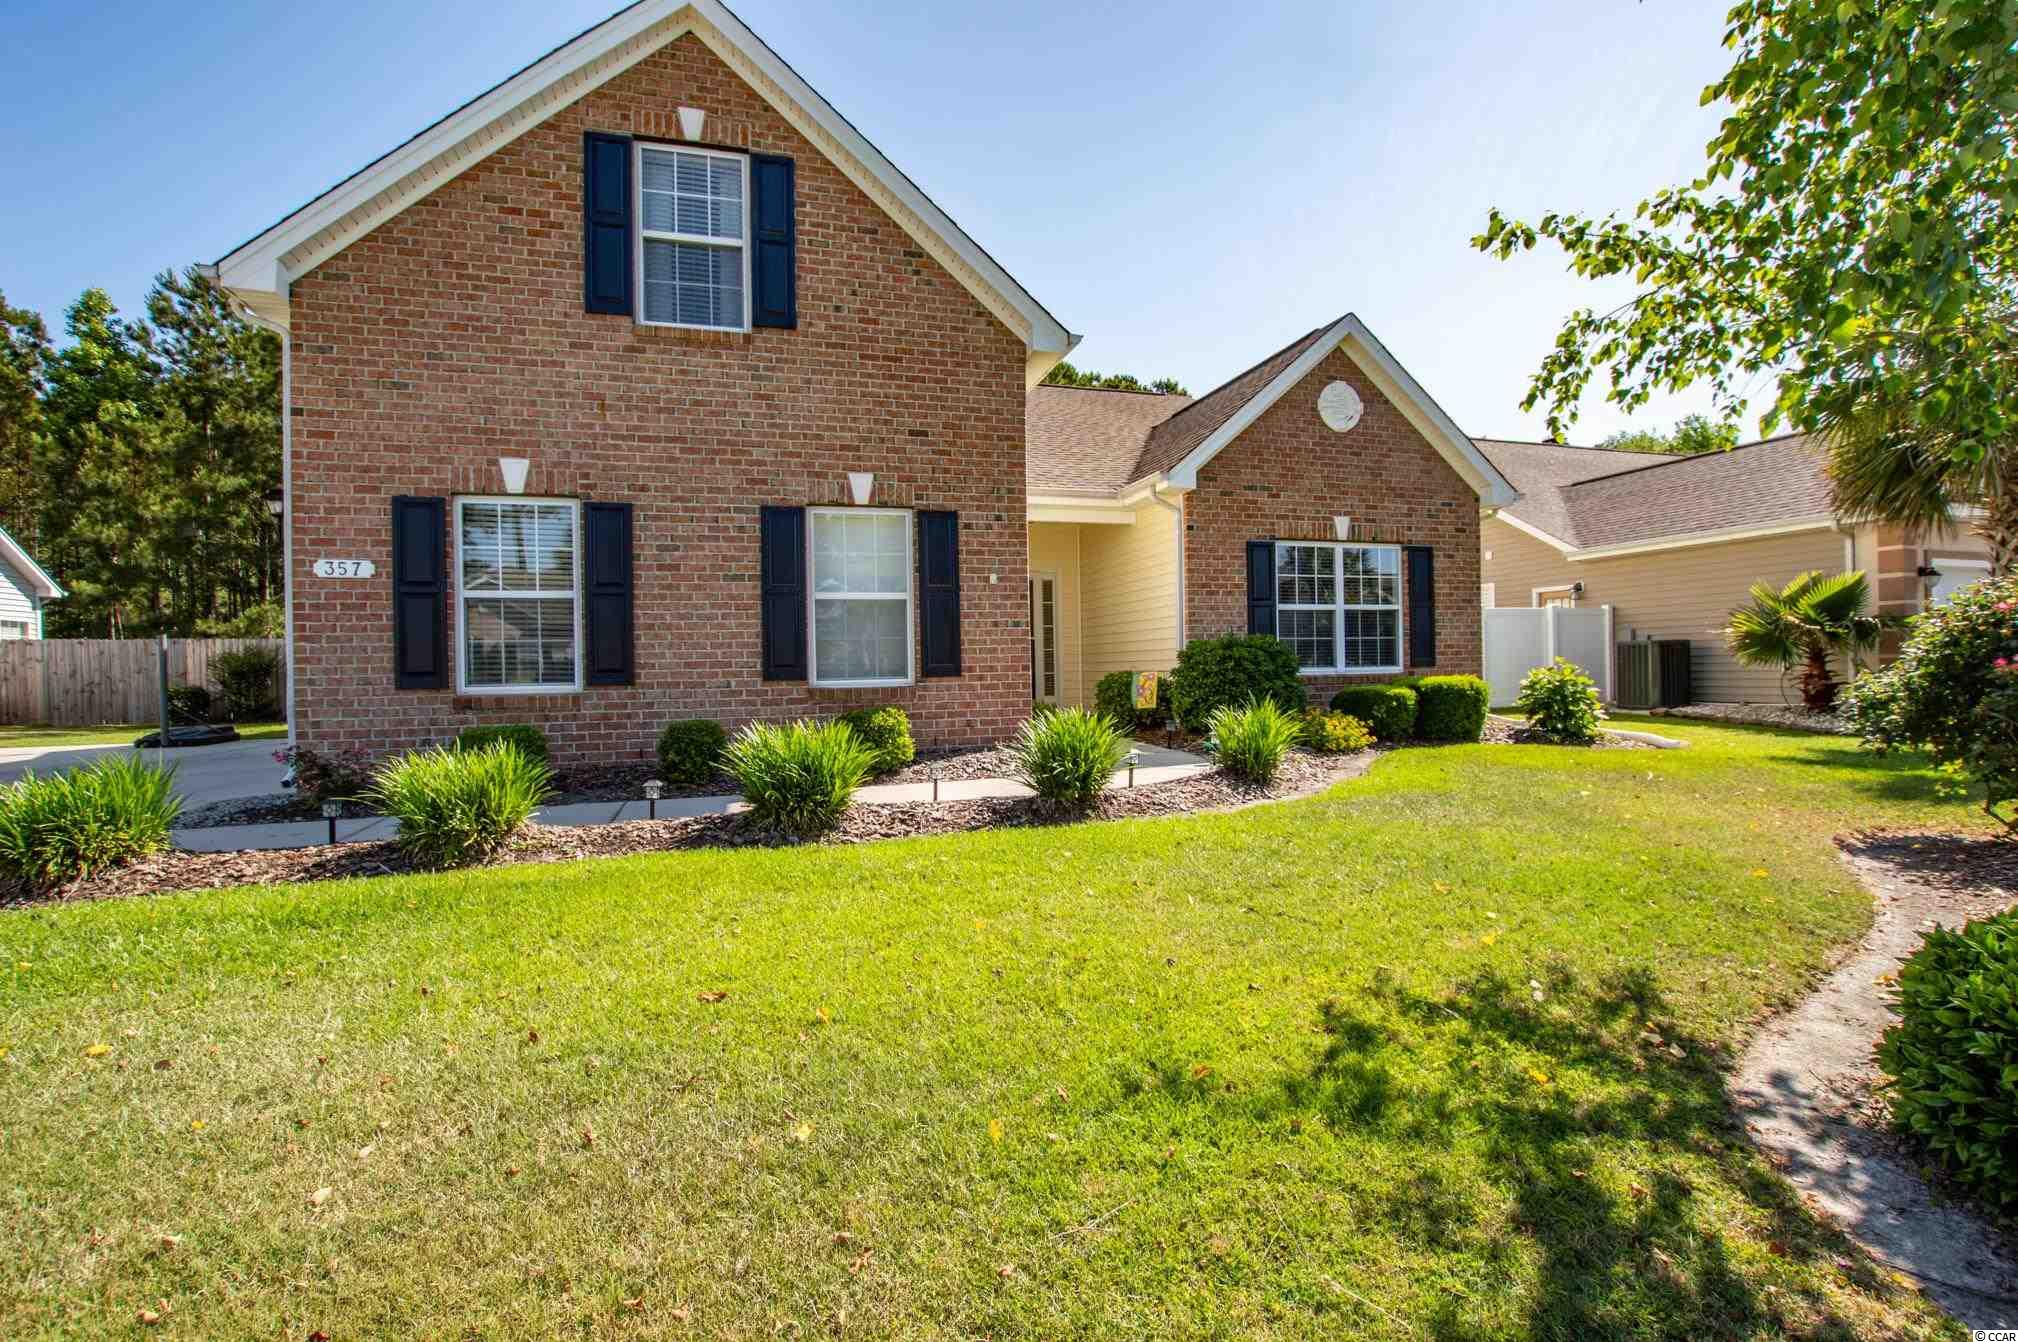 357 Carriage Lake Dr. Little River, SC 29566